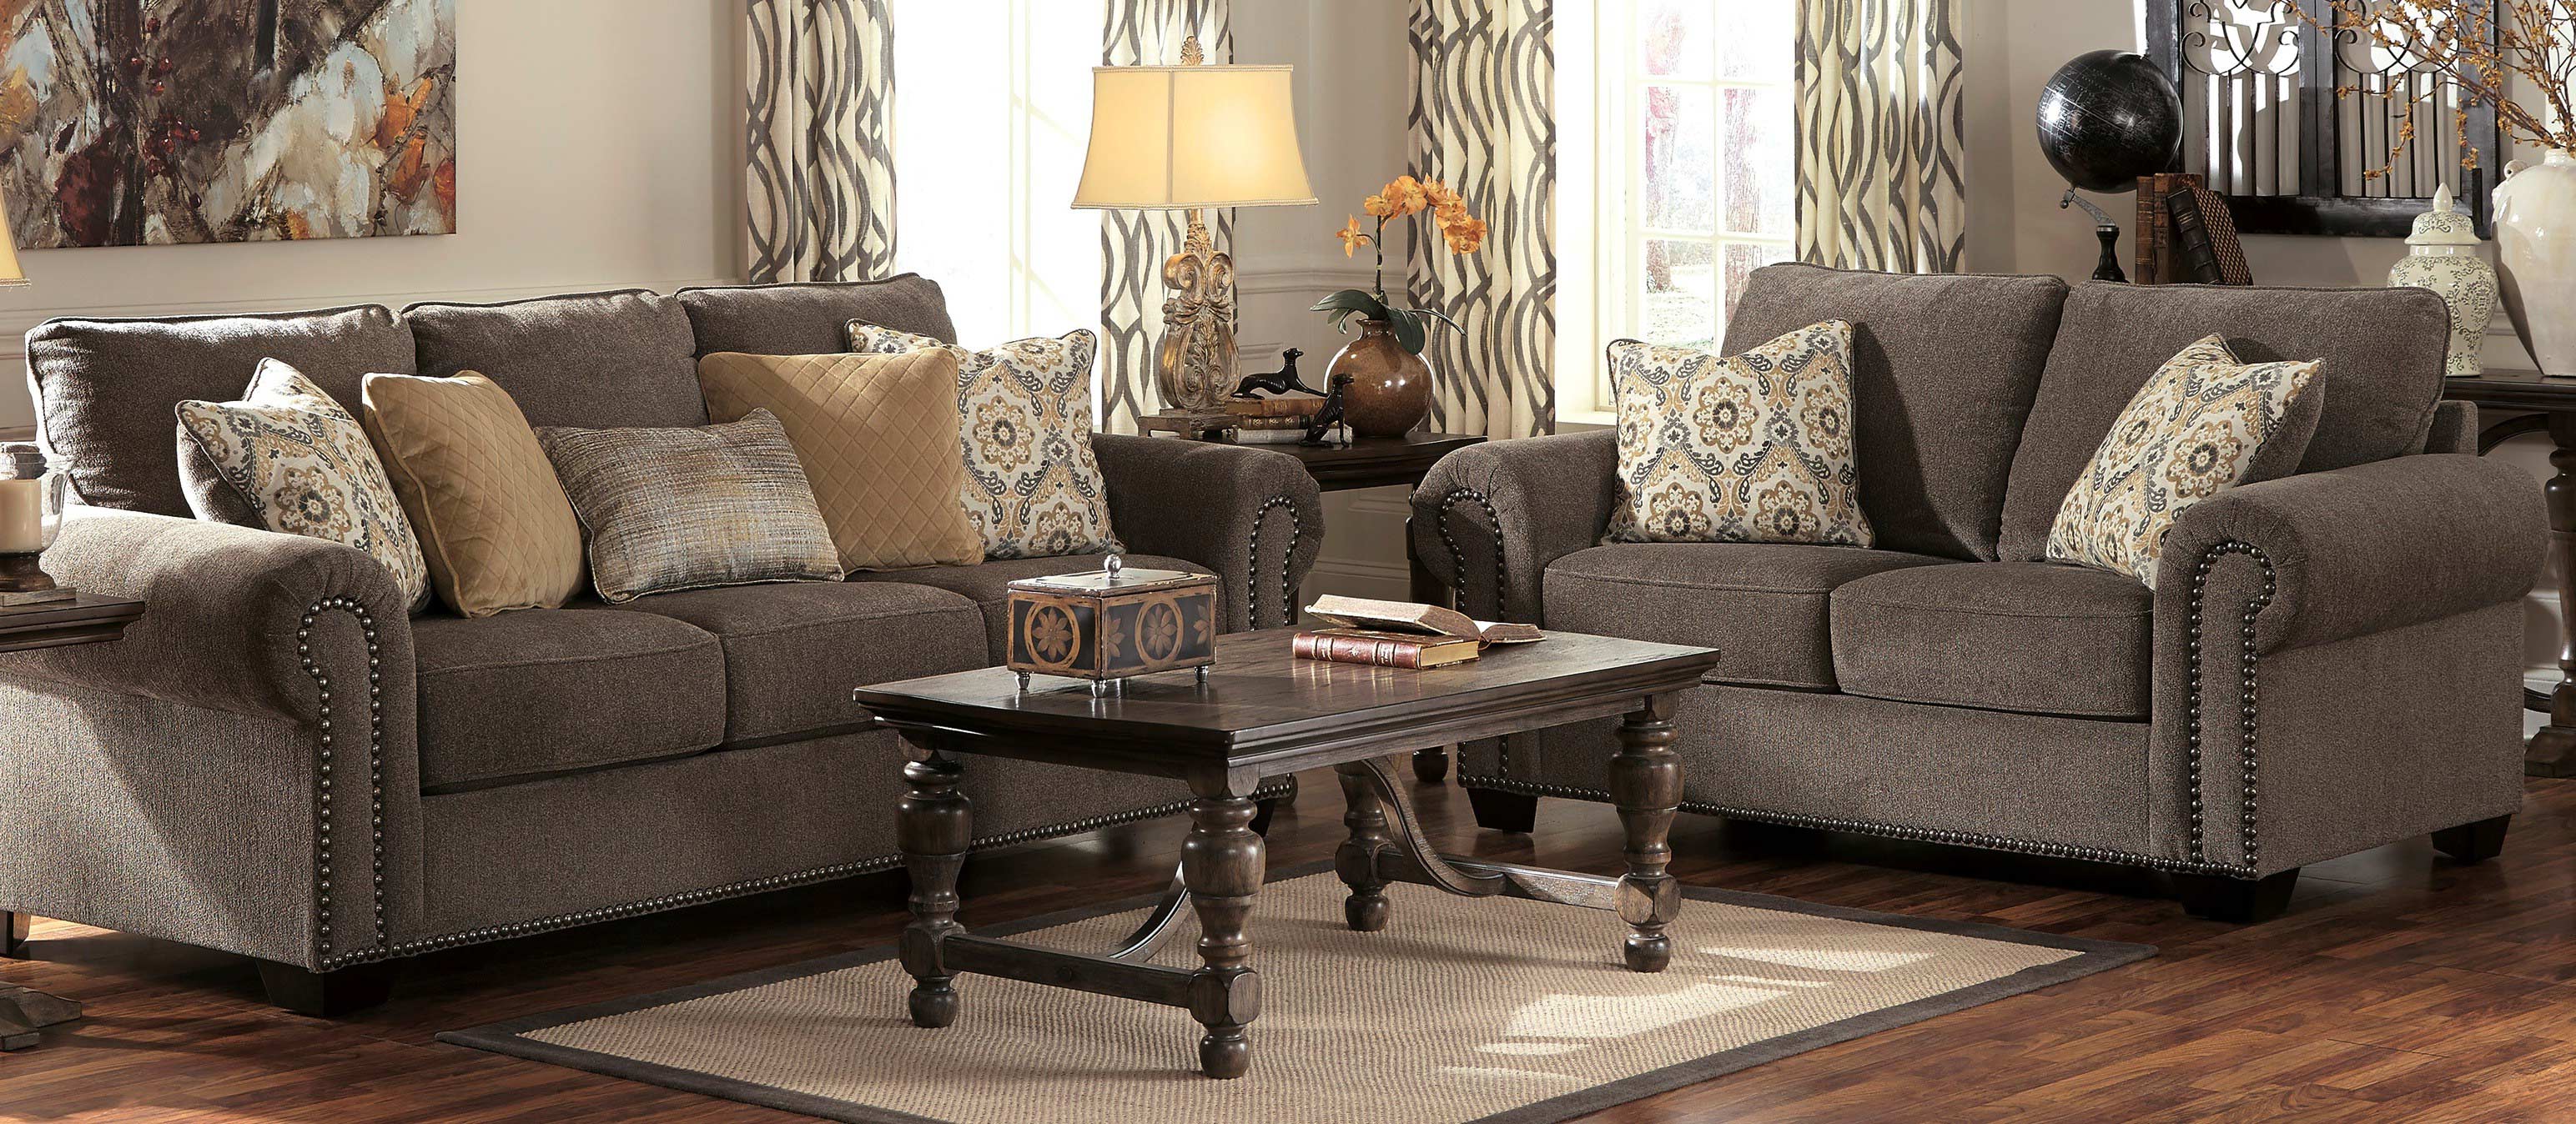 Rooms To Go Living Room Set 14 